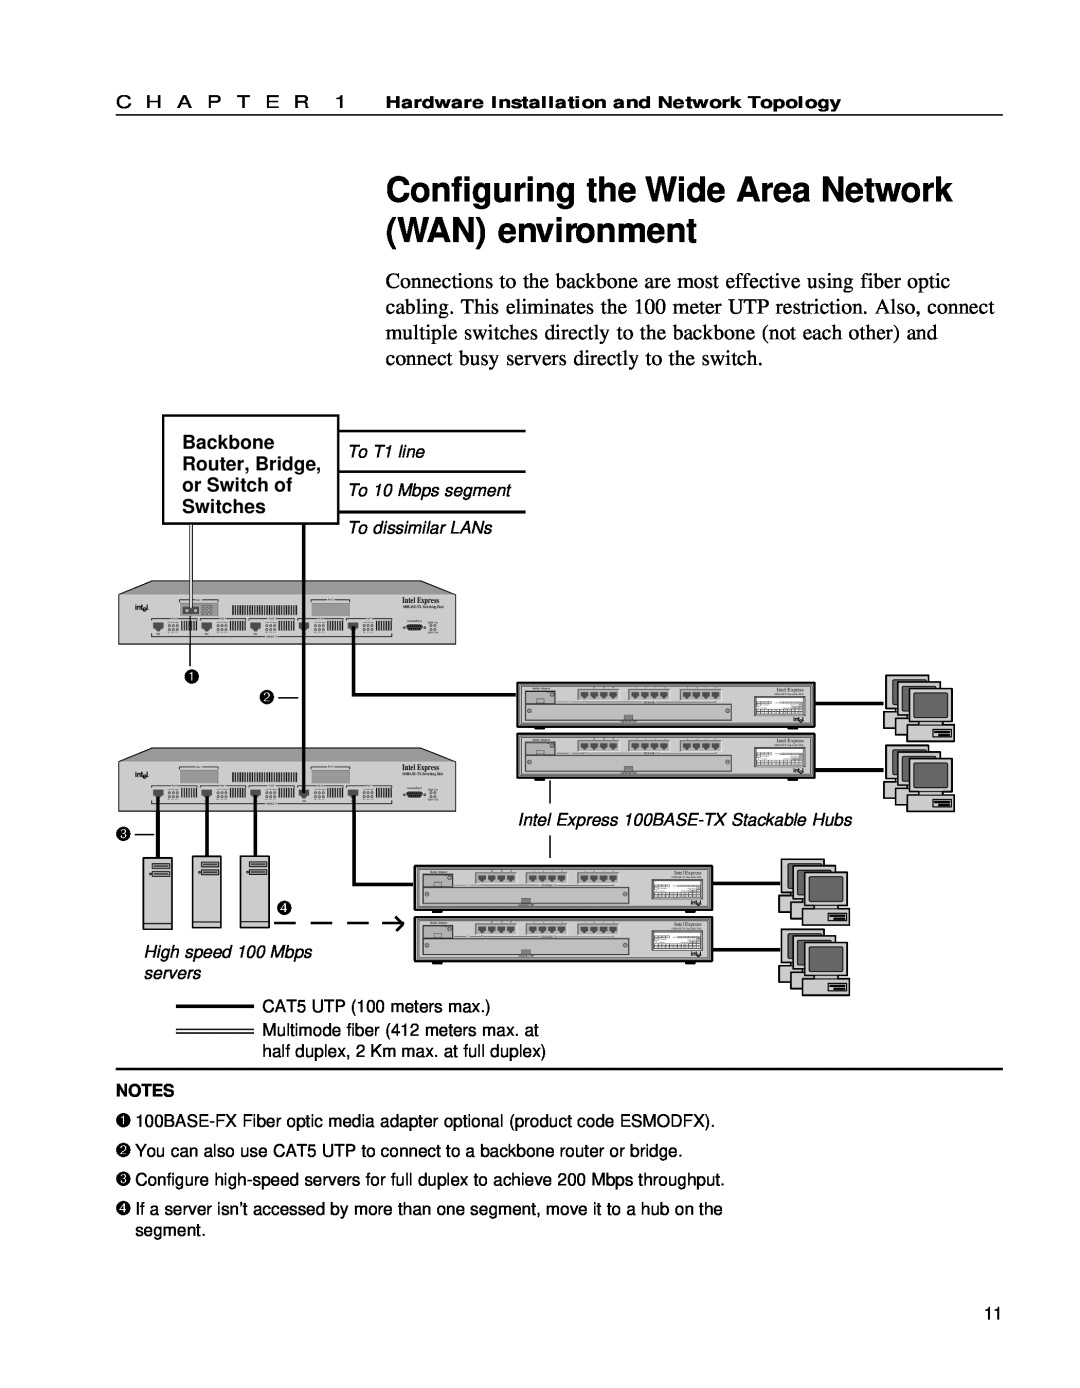 Intel 654655-001 manual Configuring the Wide Area Network WAN environment, Backbone, Router, Bridge, or Switch of, Switches 